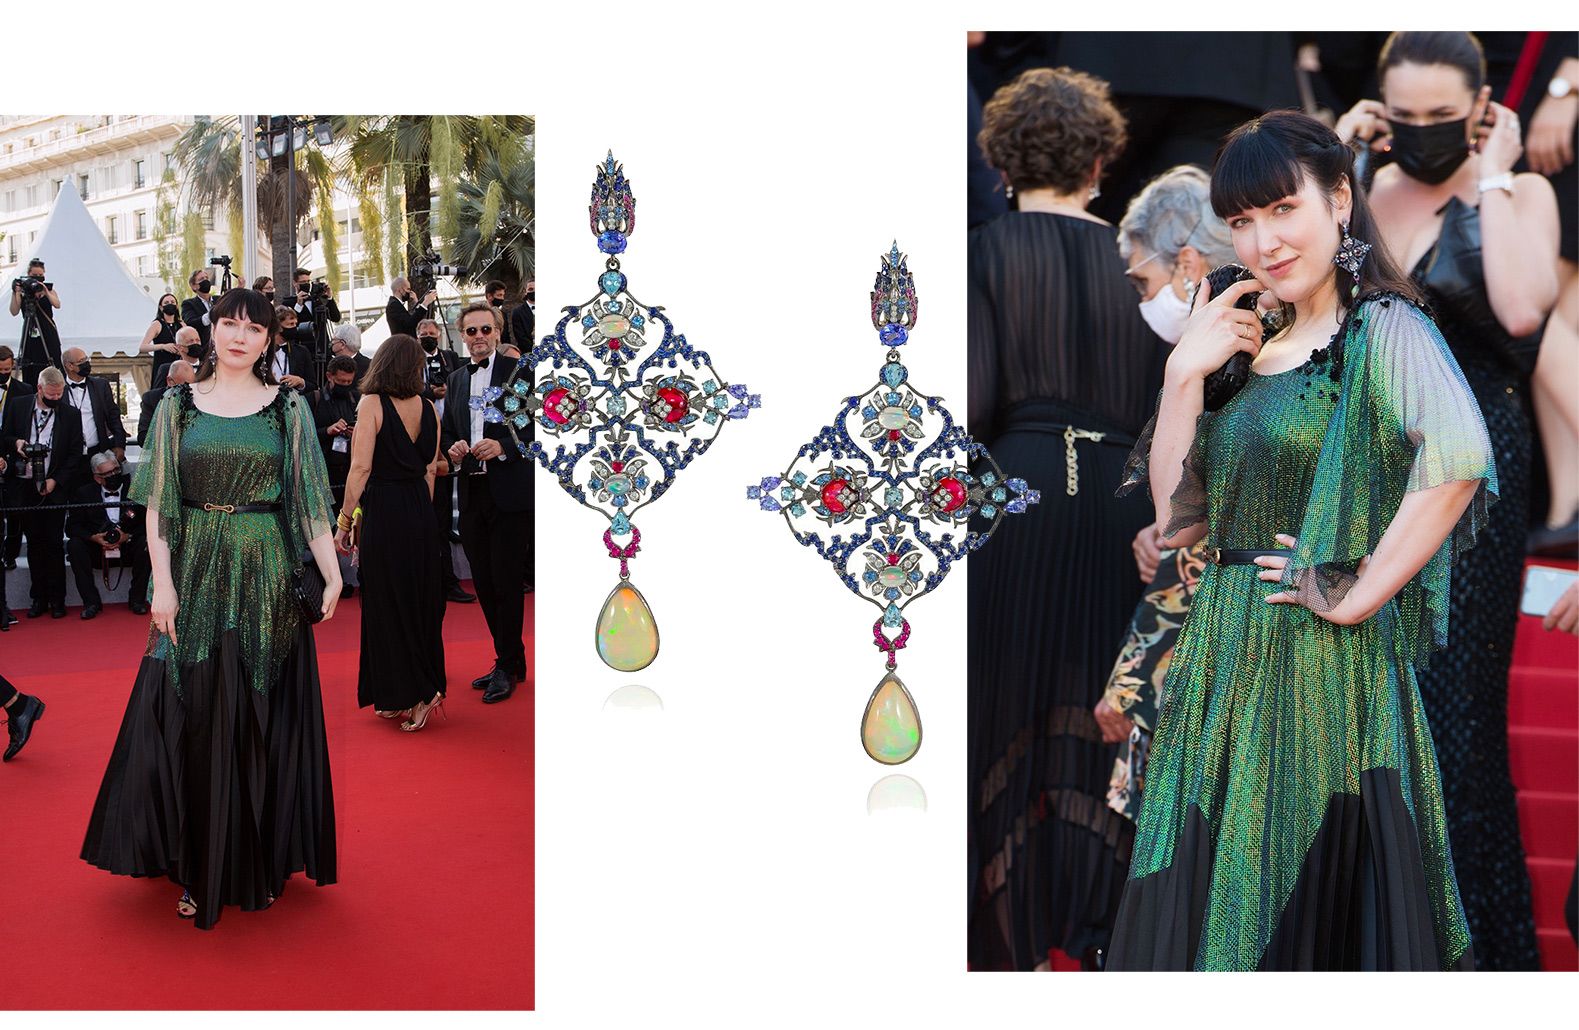 Katerina Perez at the Cannes Film Festival 2021 wearing a Gemy Maalouf gown, Alzuarr shoes and Lydia Courteille earrings from the Topkapi collection